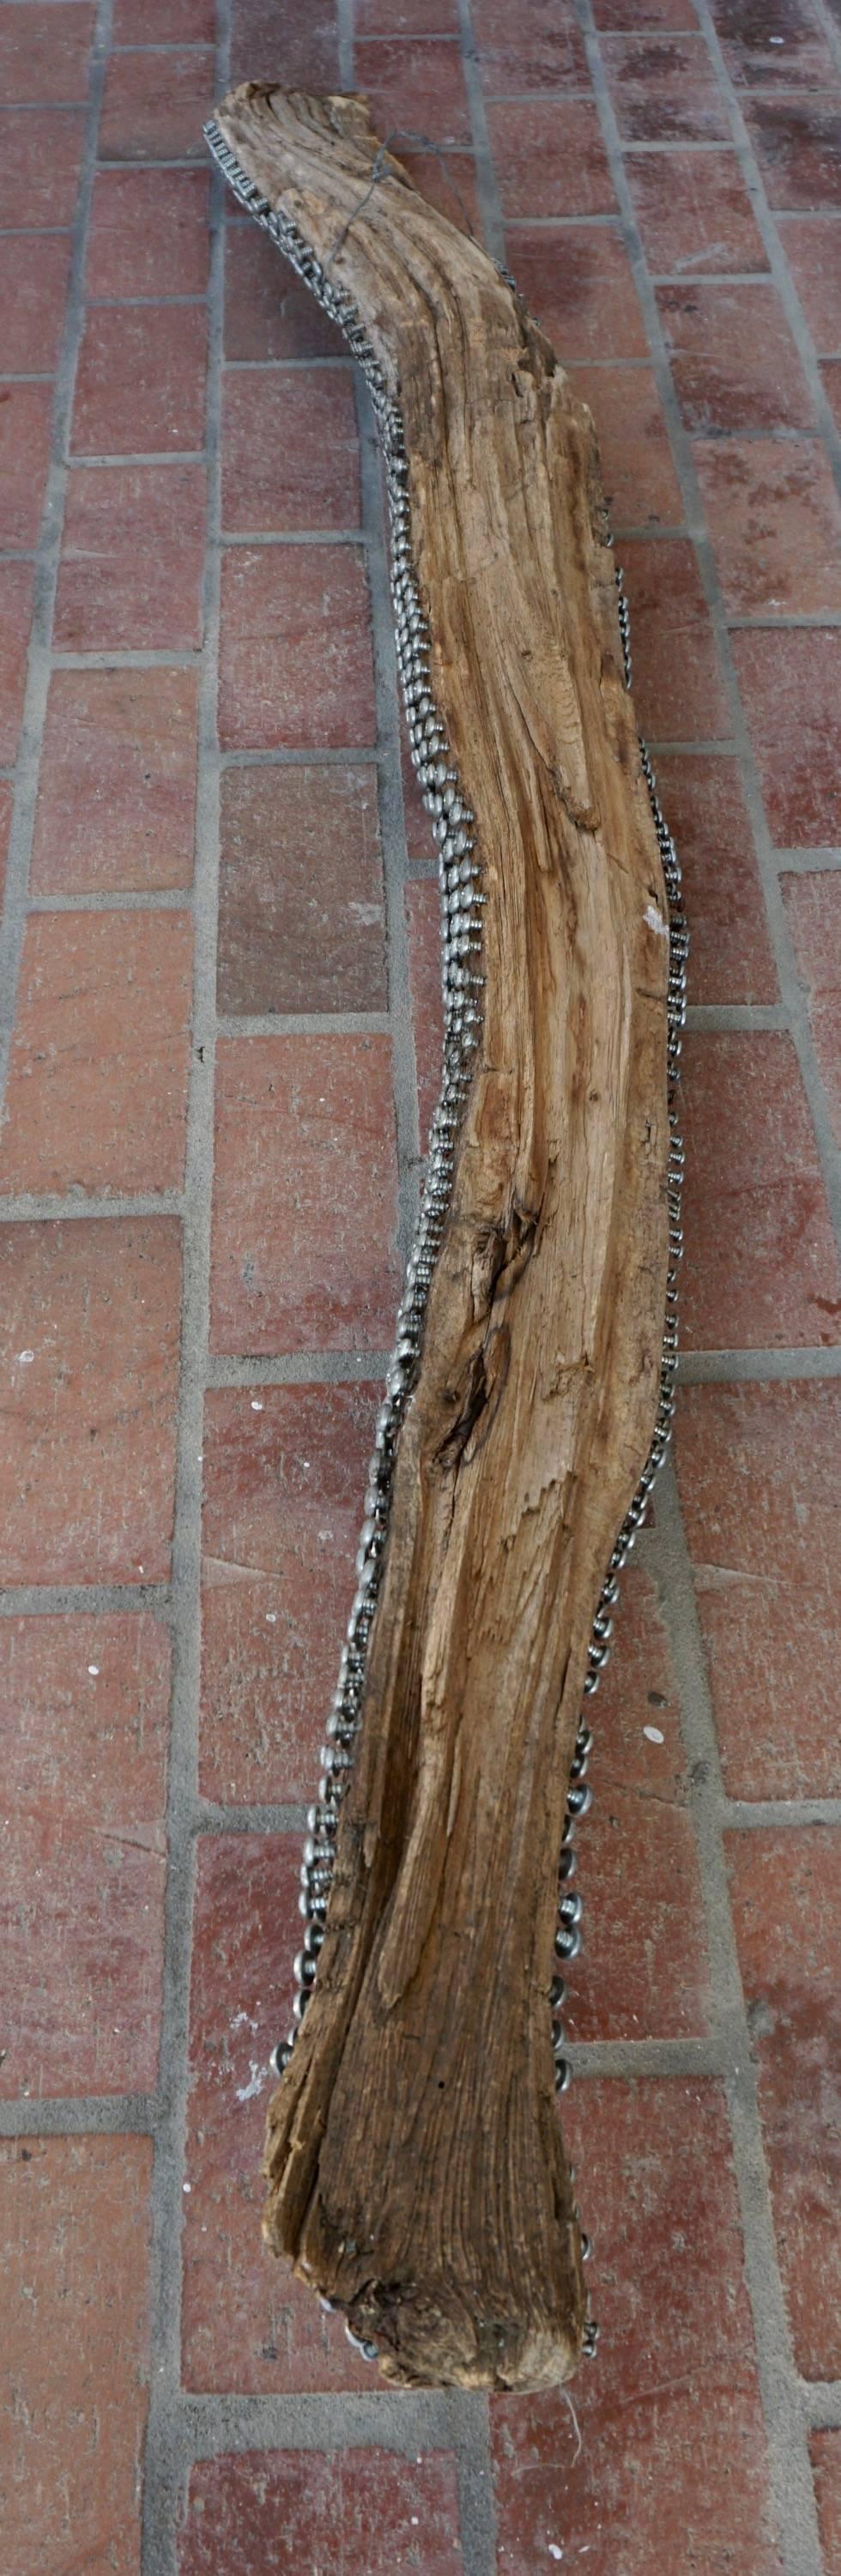 Unusual Screw and Driftwood Sculpture 1